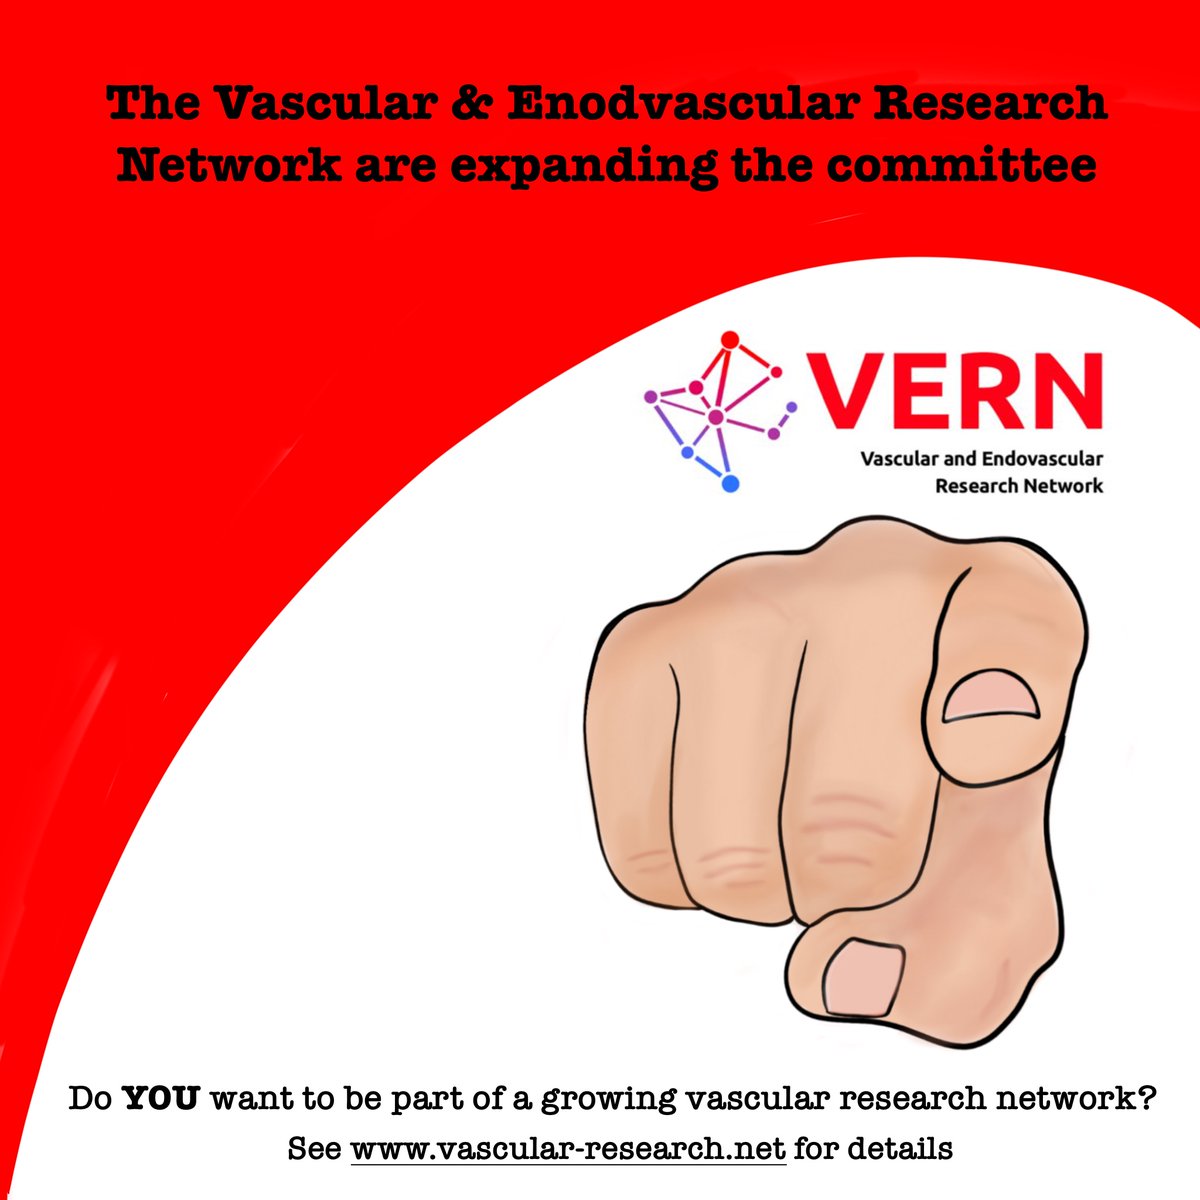 Would you like to be involved in collaborative, trainee-led vascular research? 🔬 We’re expanding our committee, don’t miss out on the chance to join! ☺️ The deadline for applications is midnight on Monday 15th Jan